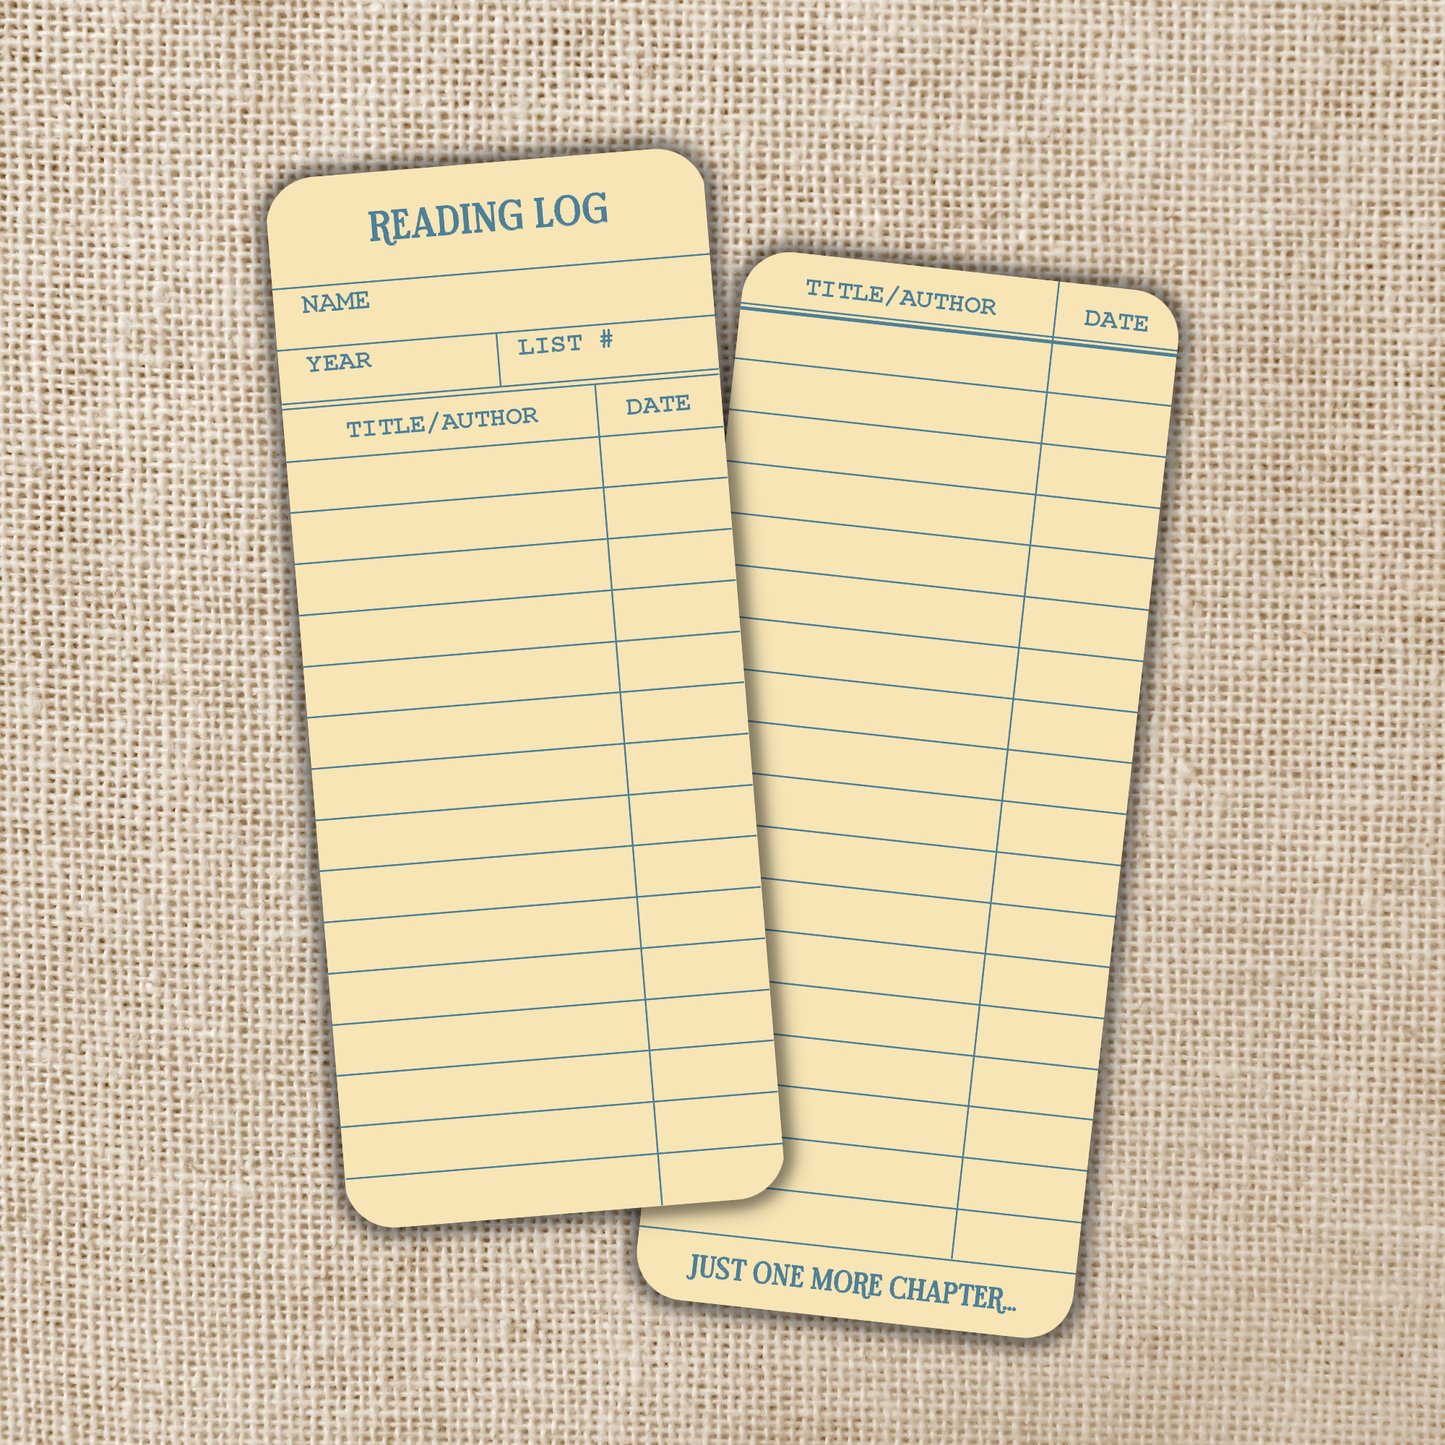 Bookmark-011: Library Card Reading Log